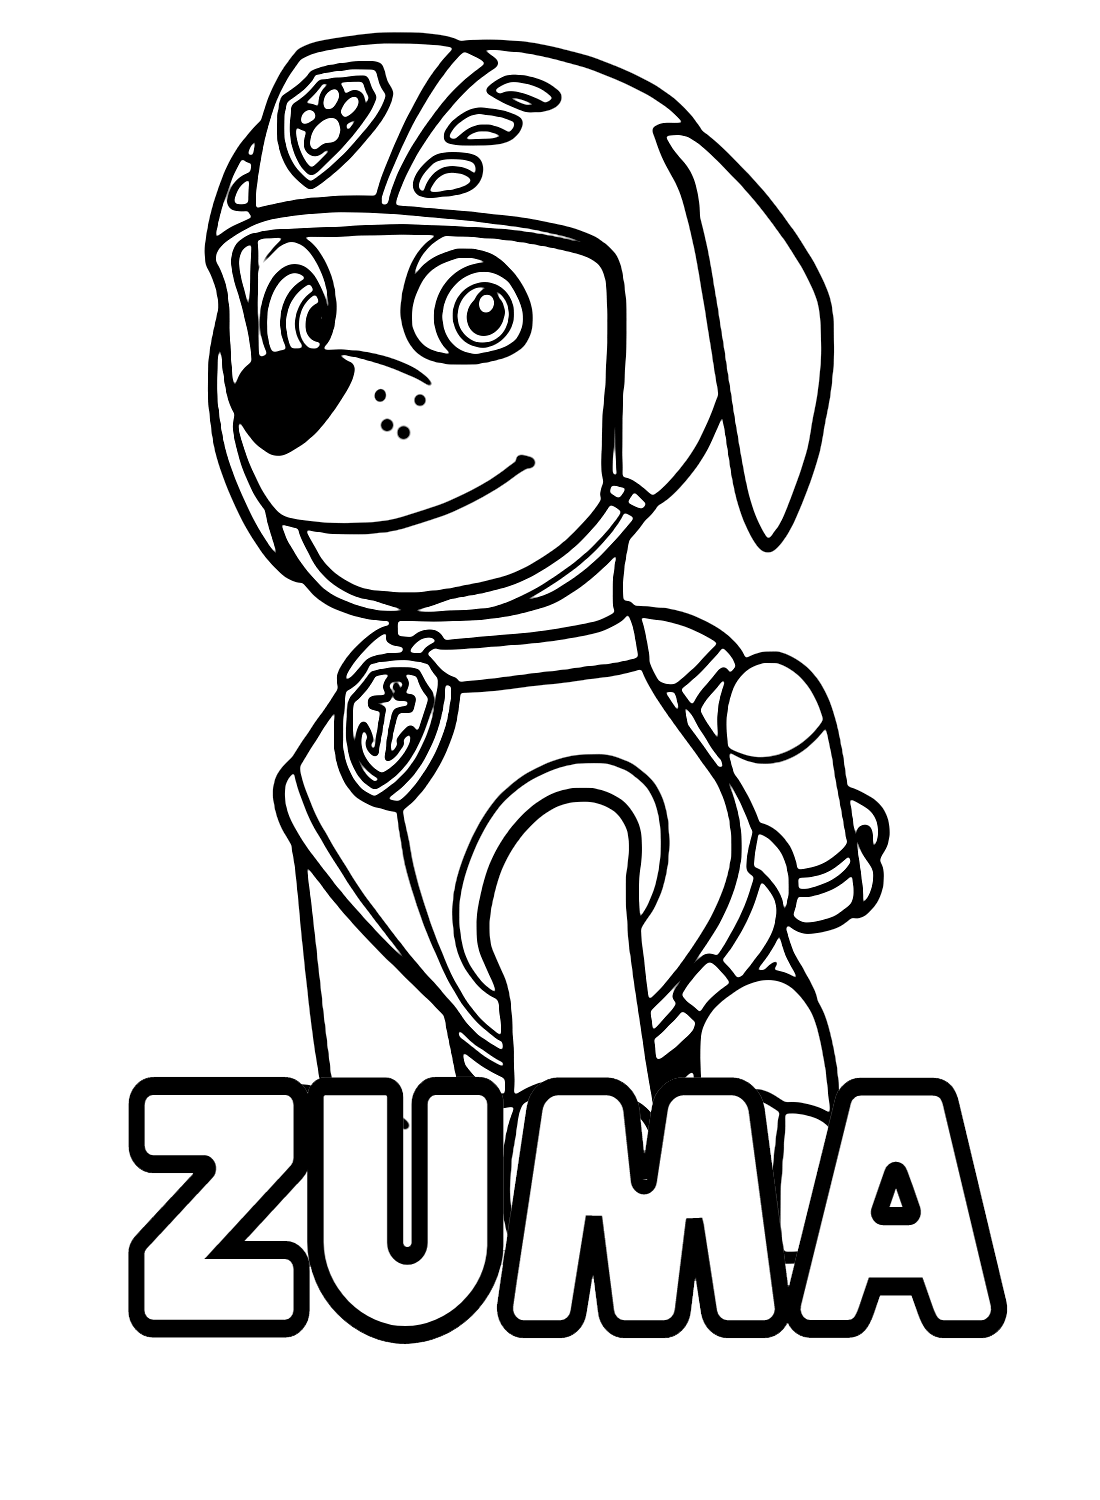 Zuma paw patrol coloring pages printable for free download